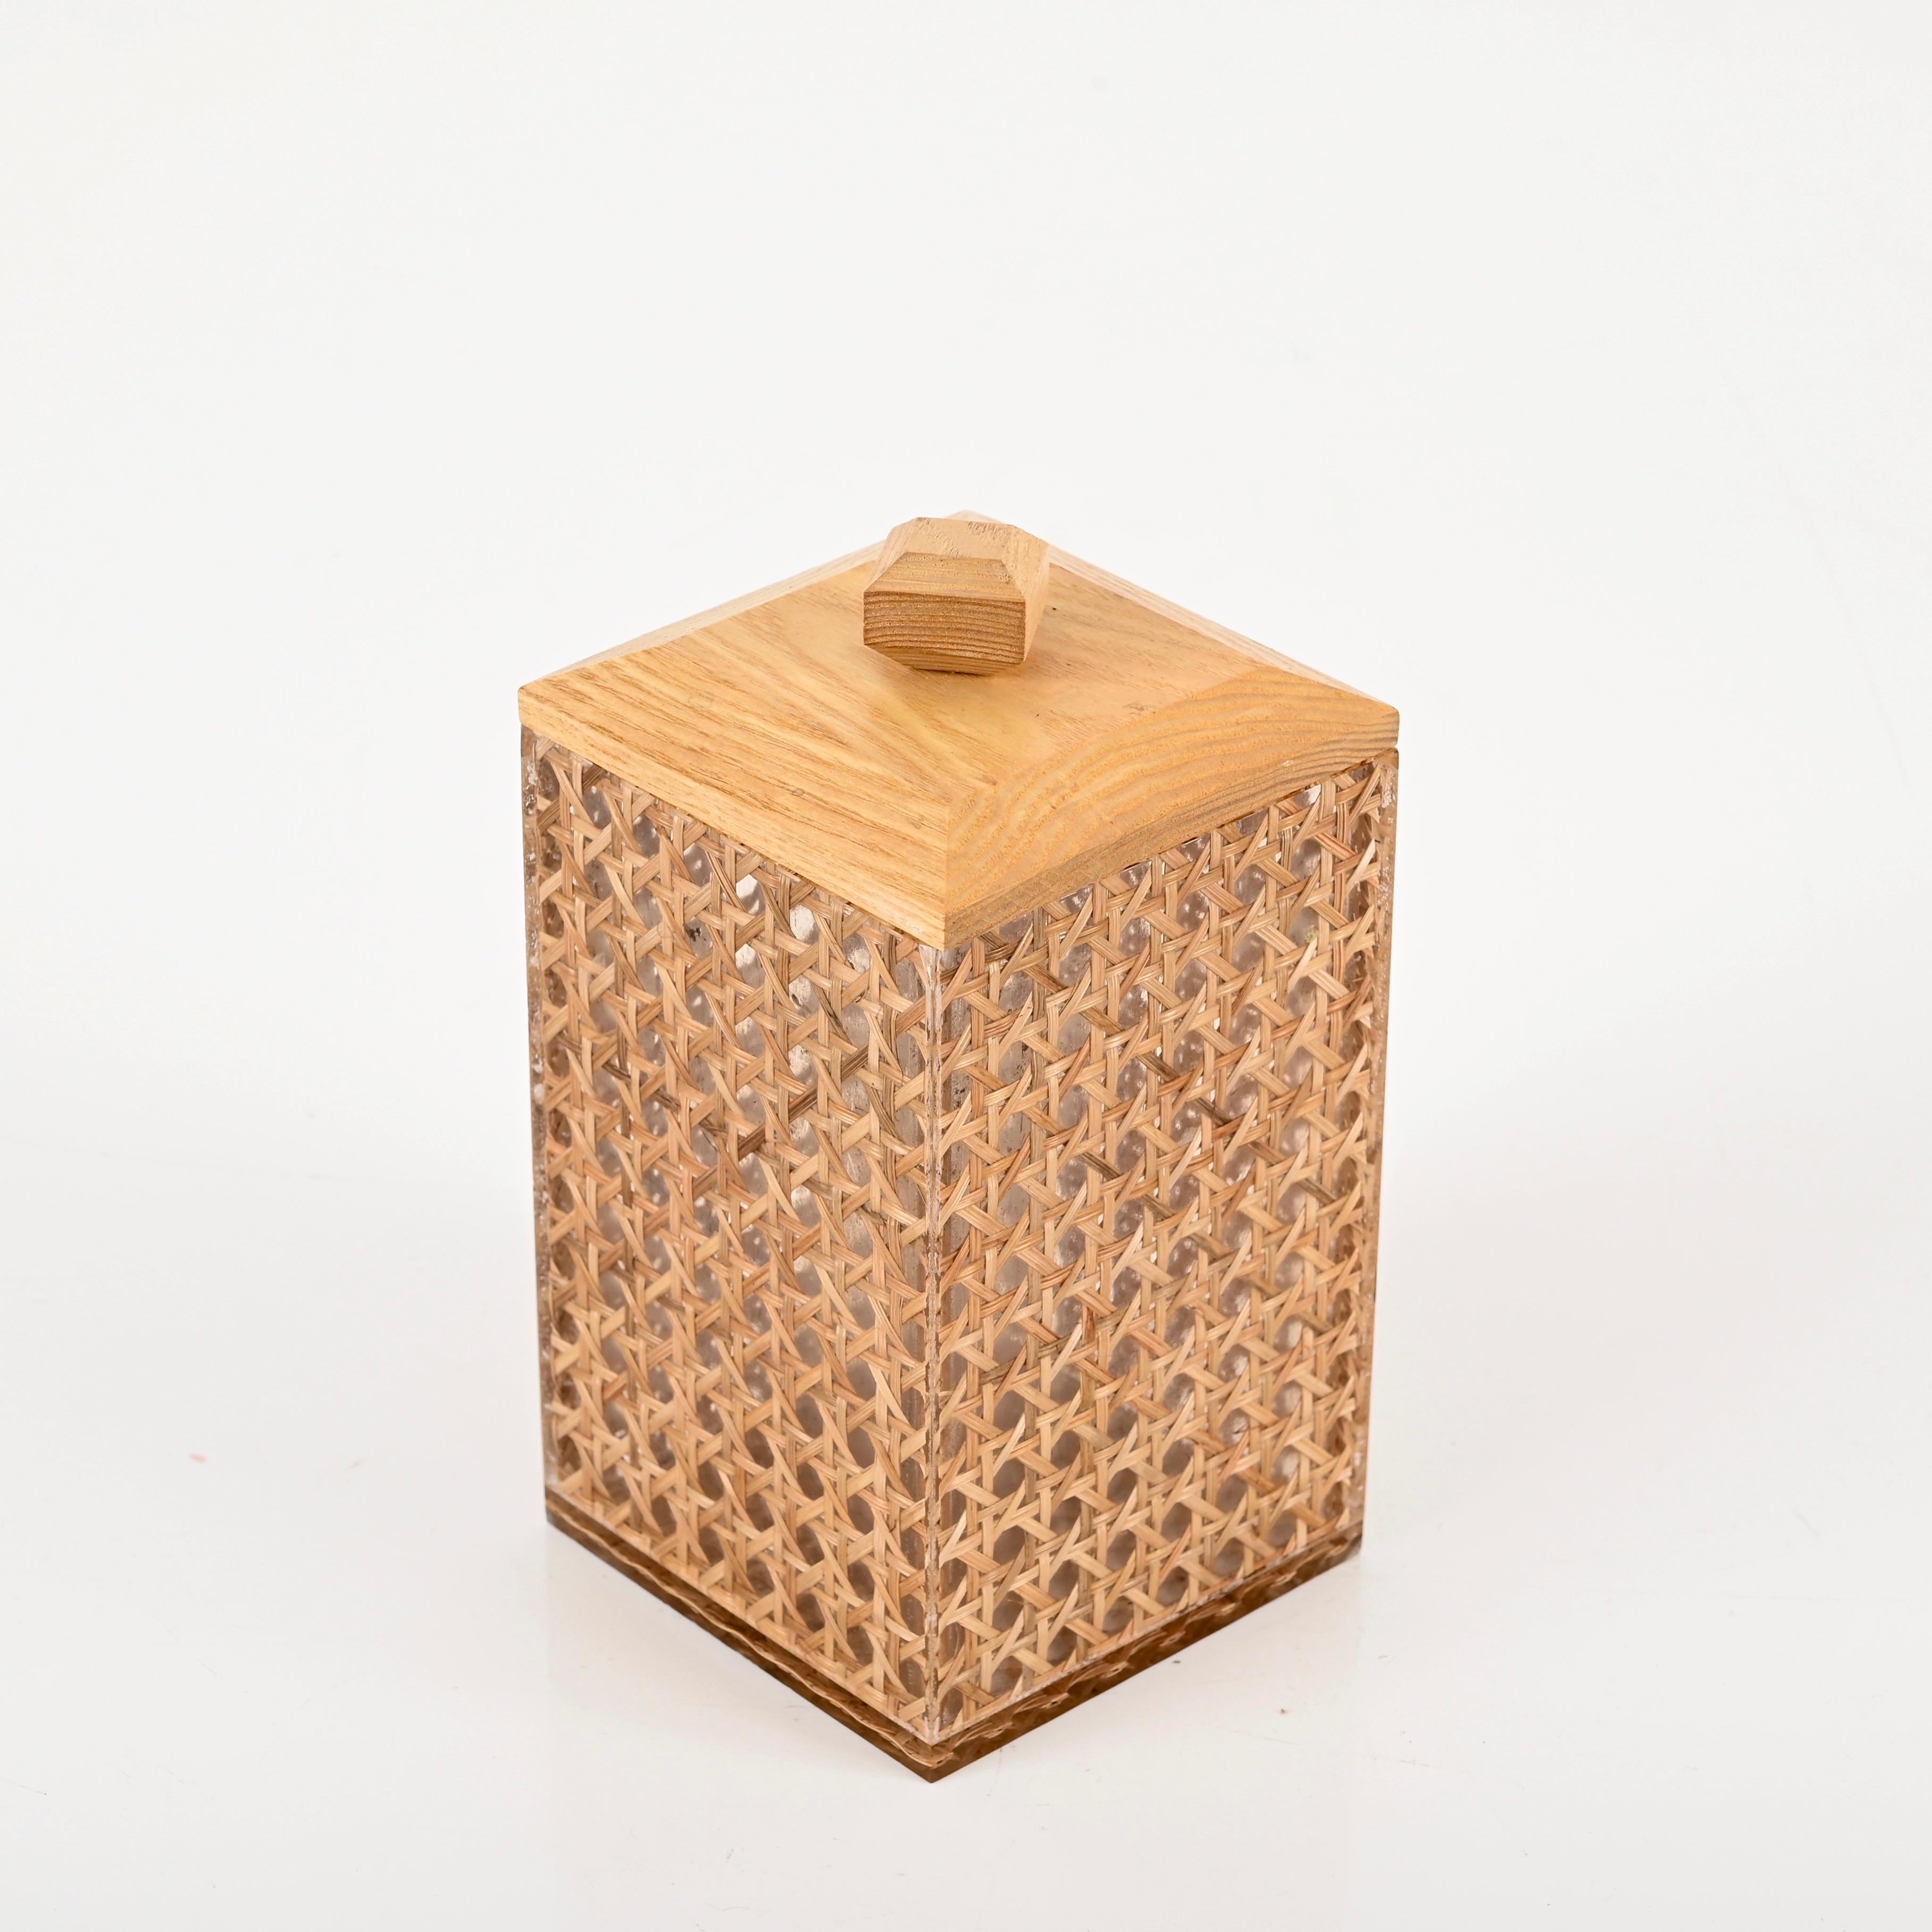 Late 20th Century Wicker, Lucite an Wood Decorative Box, Christian Dior Style, Italy 1970s  For Sale